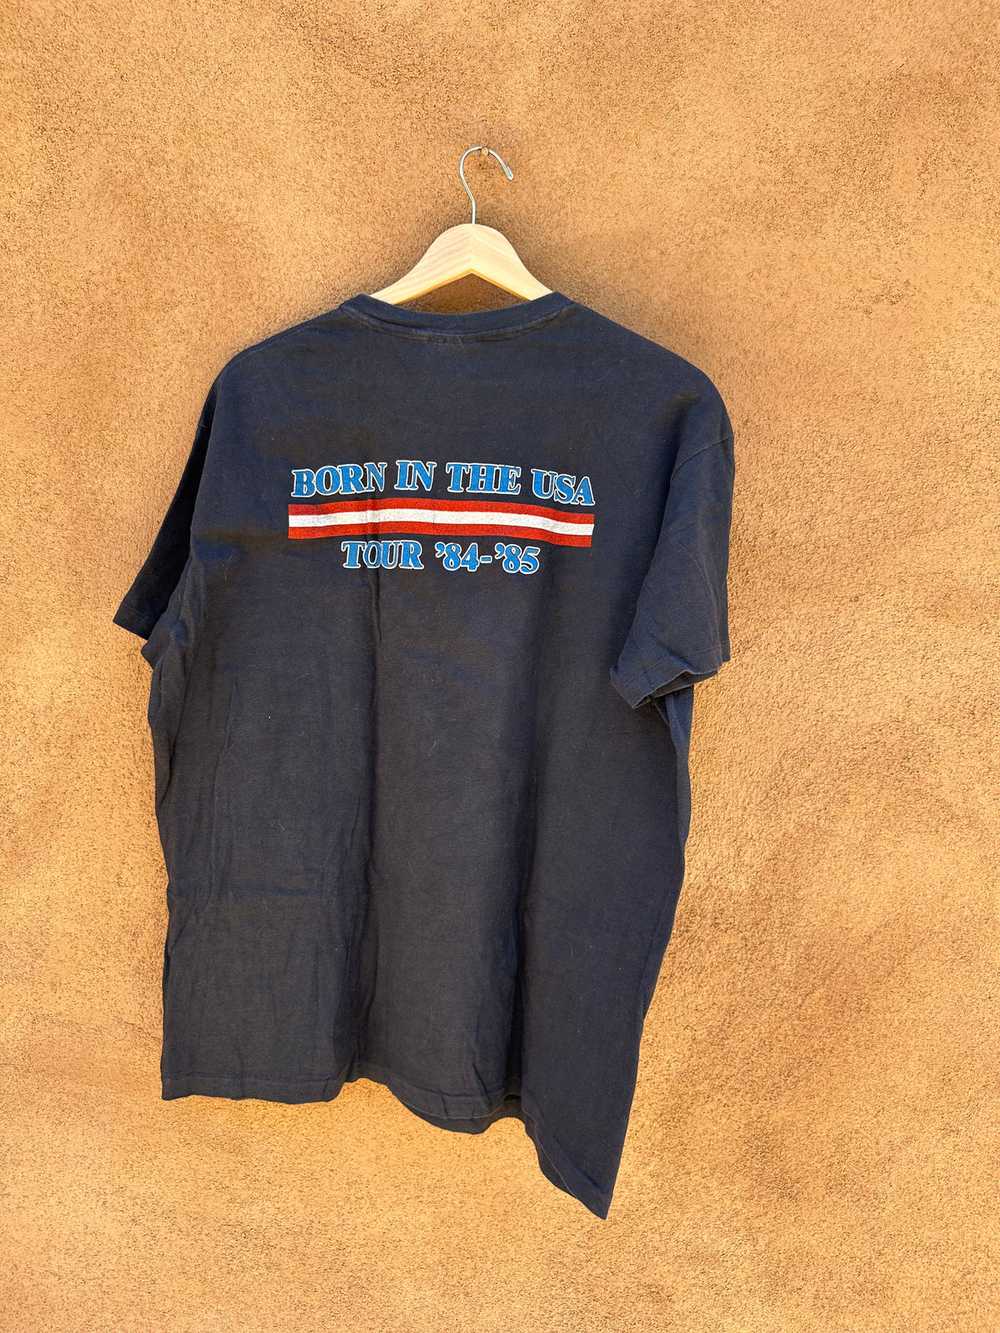 Jump! 1984 Bruce Springsteen '84-'85 Tour Tee - image 3